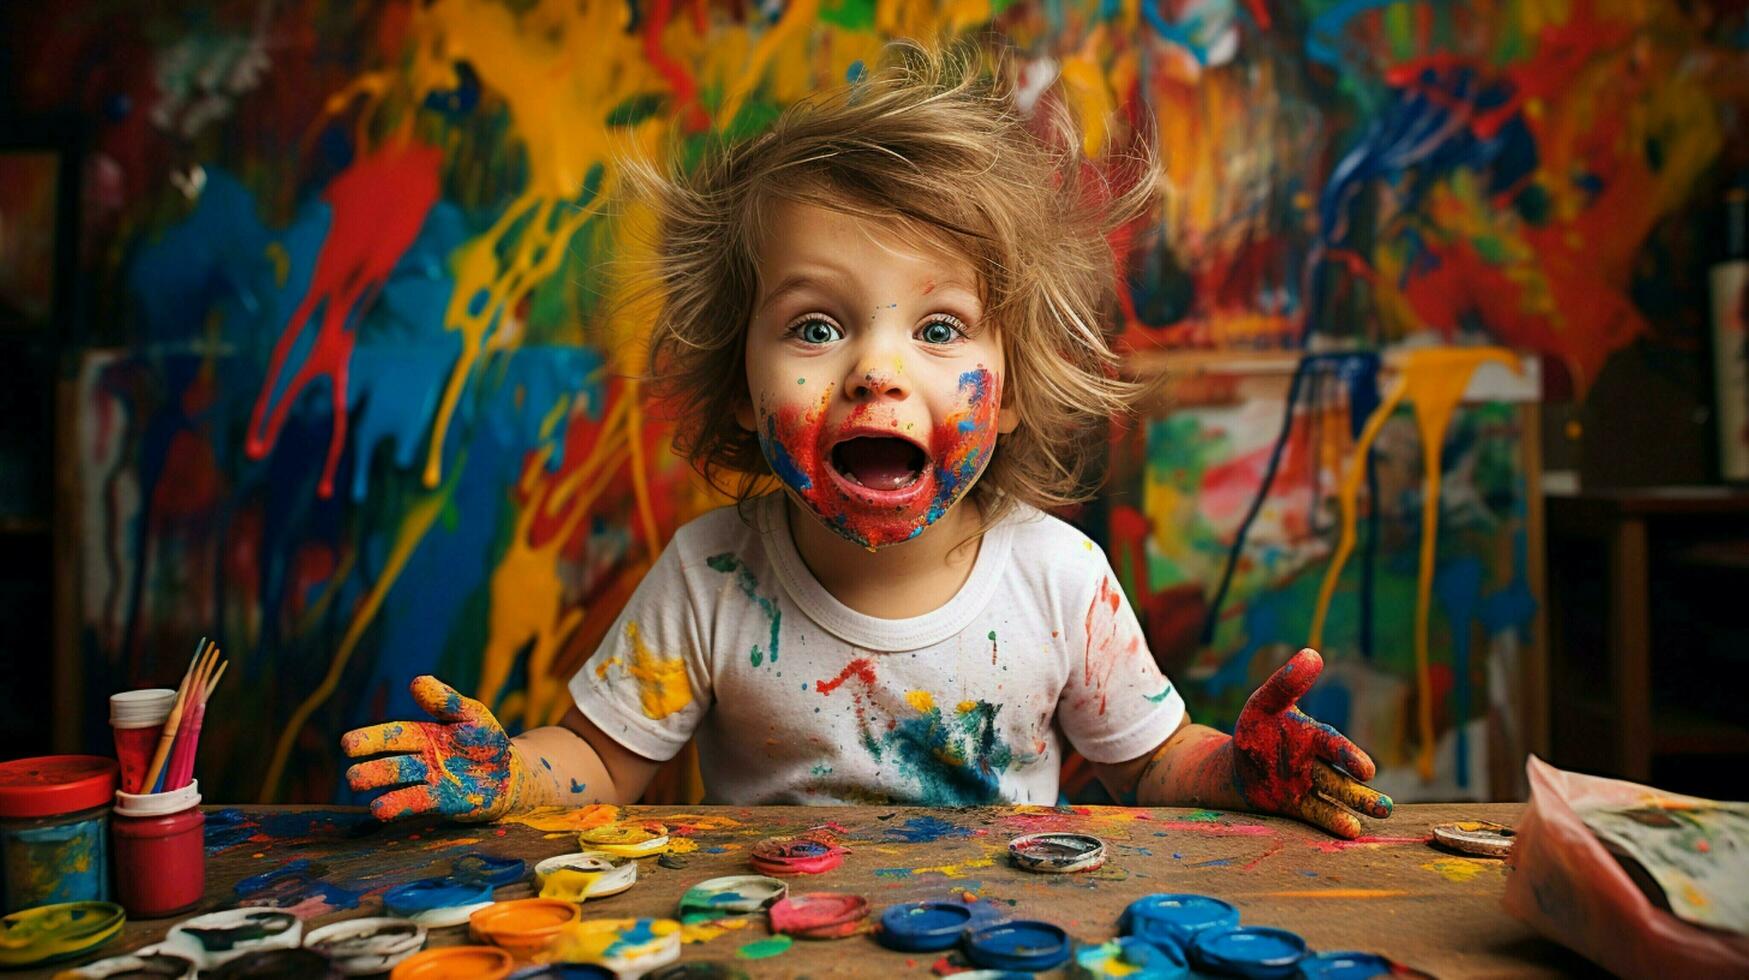 colorful childhood learning with vibrant art equipment photo